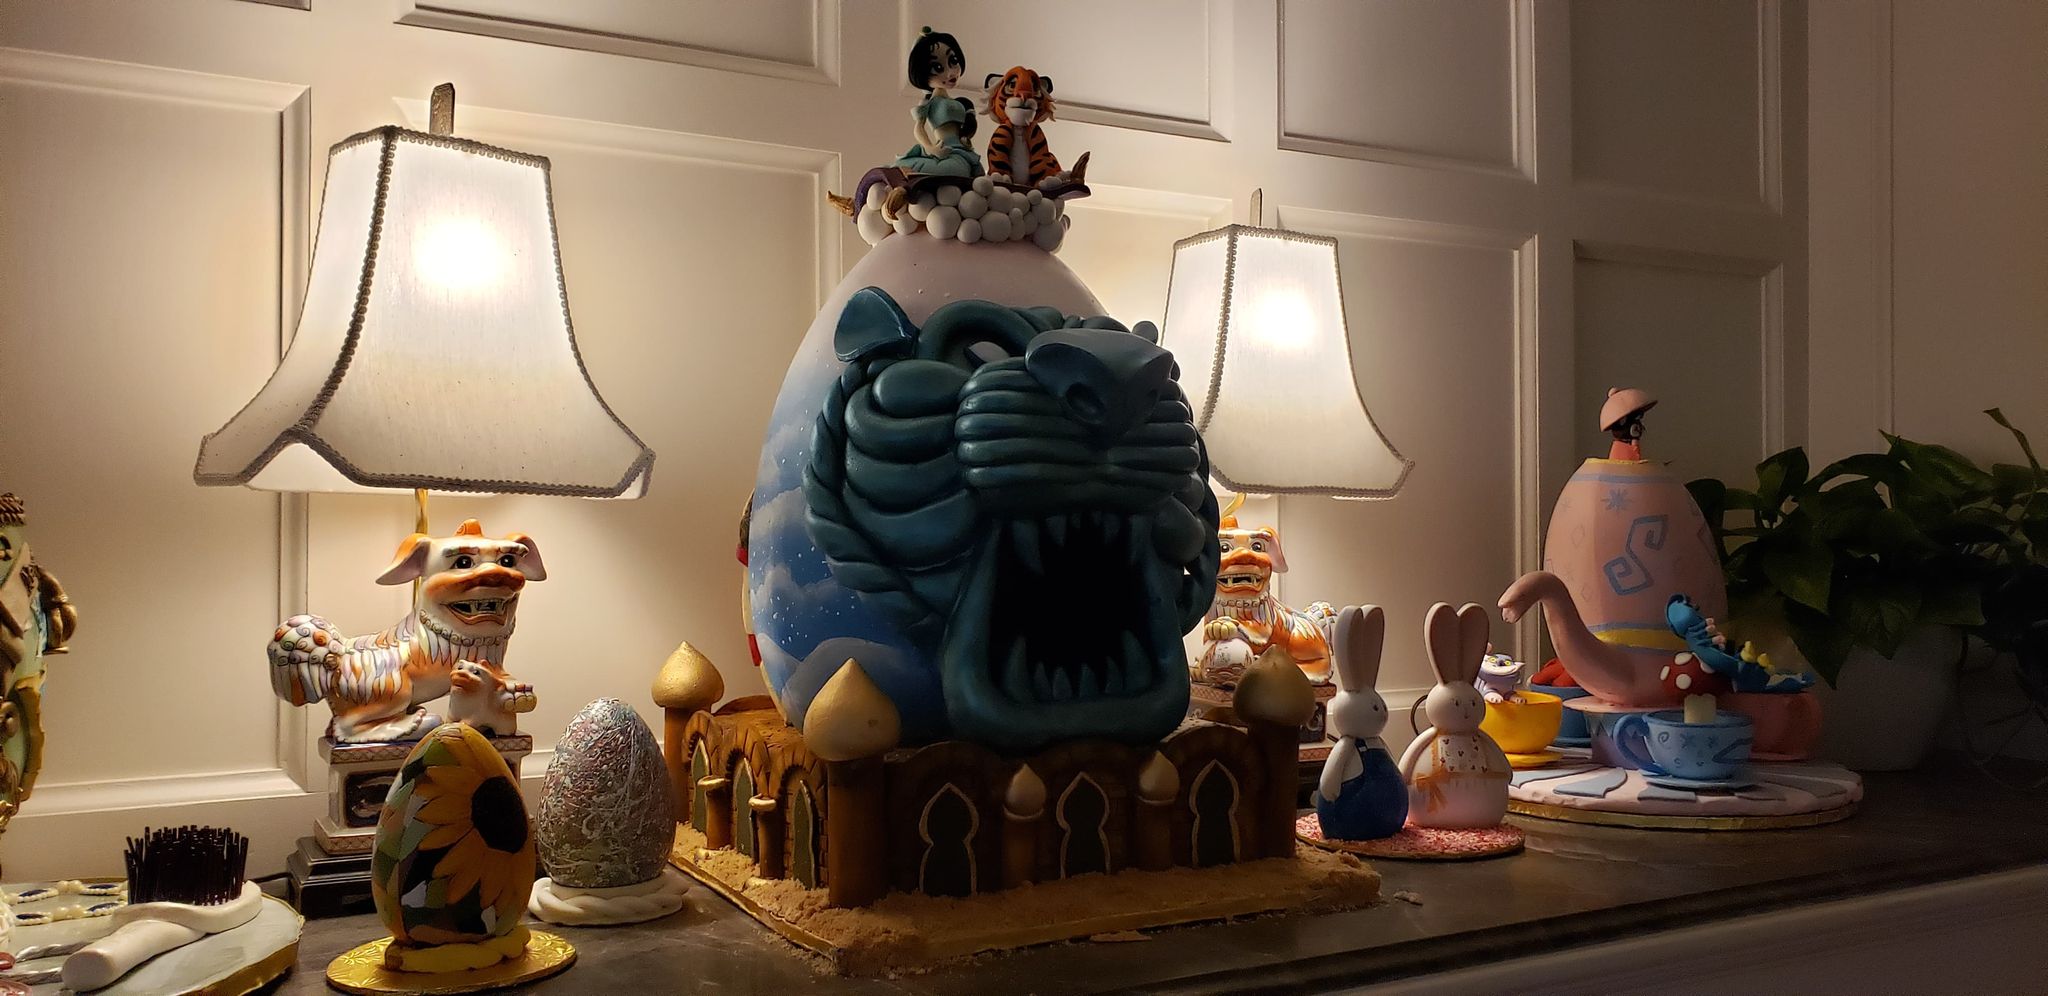 First Look at the Easter Egg displays at the Yacht & Beach Club